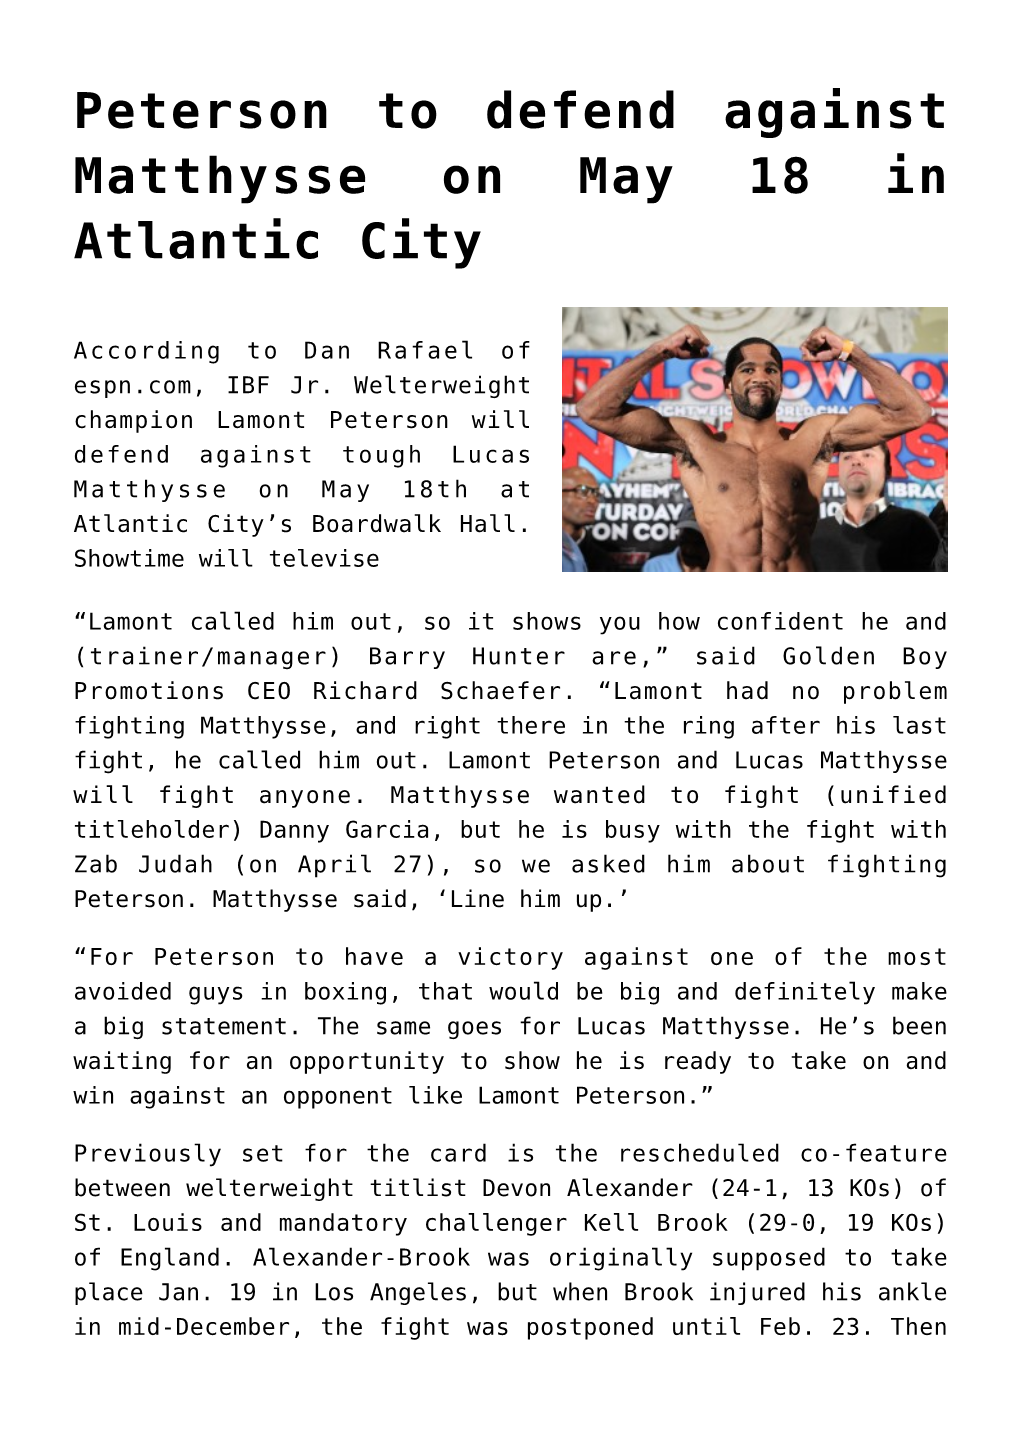 Peterson to Defend Against Matthysse on May 18 in Atlantic City